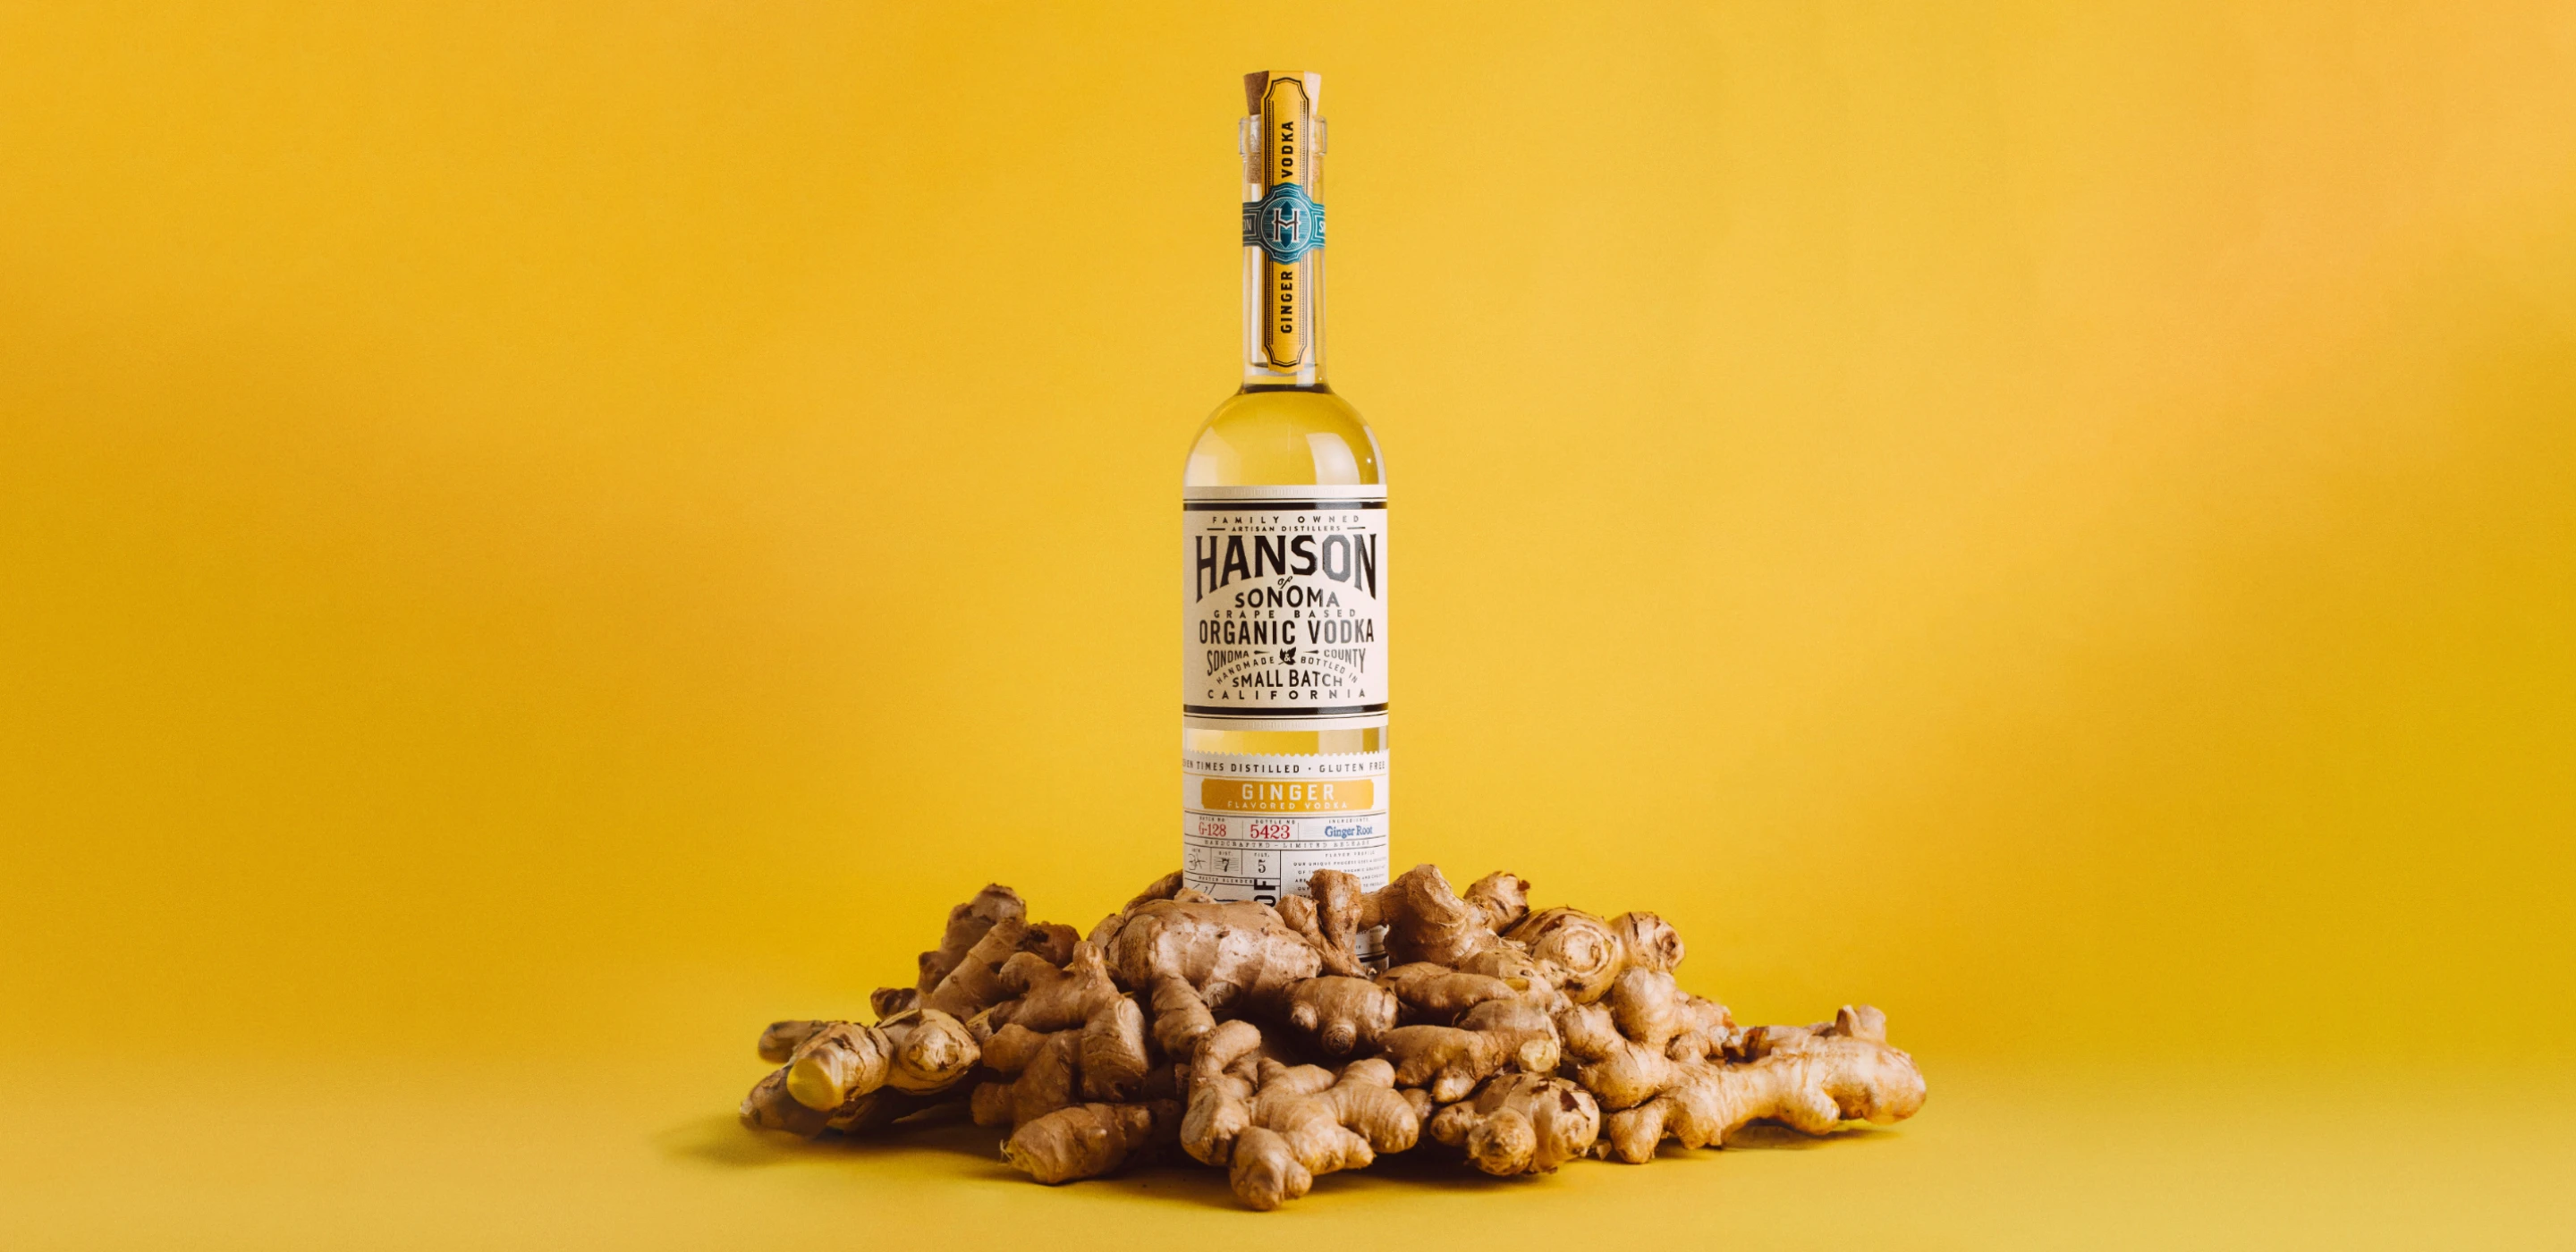 Ginger Flavour Vodka Bottle surrounded by ginger root